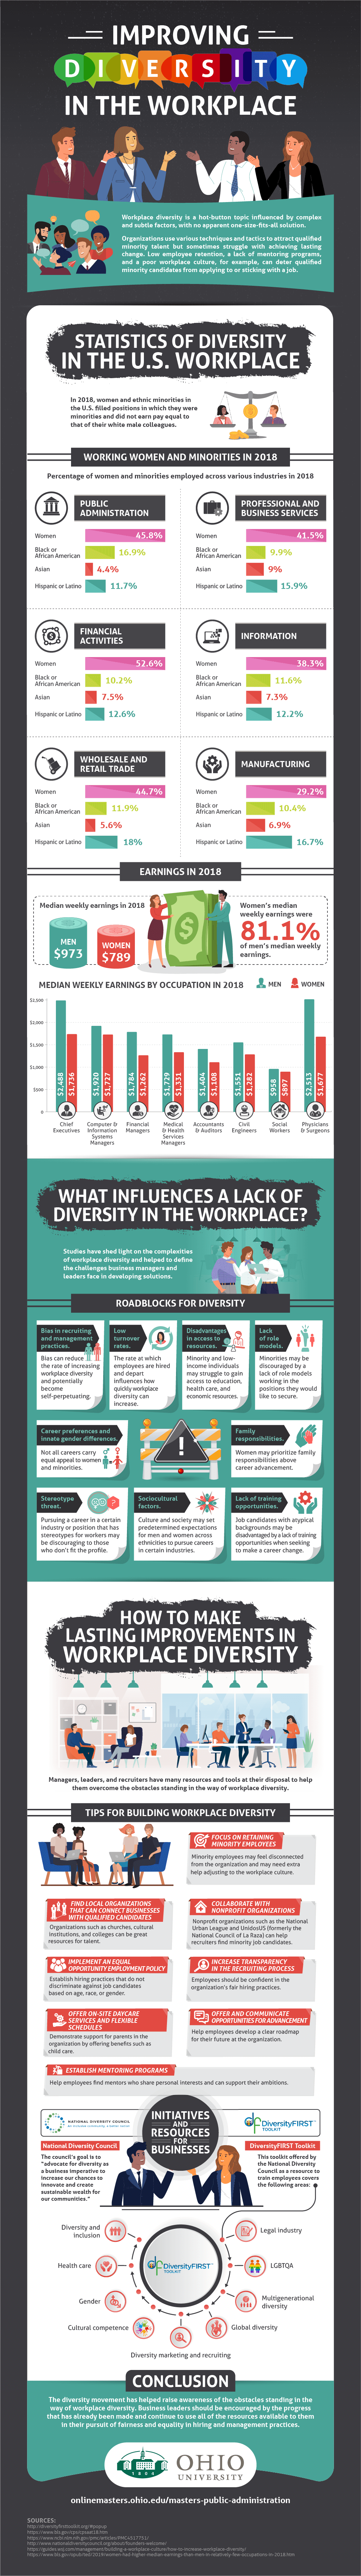 Improving Diversity in the Workplace Infographic